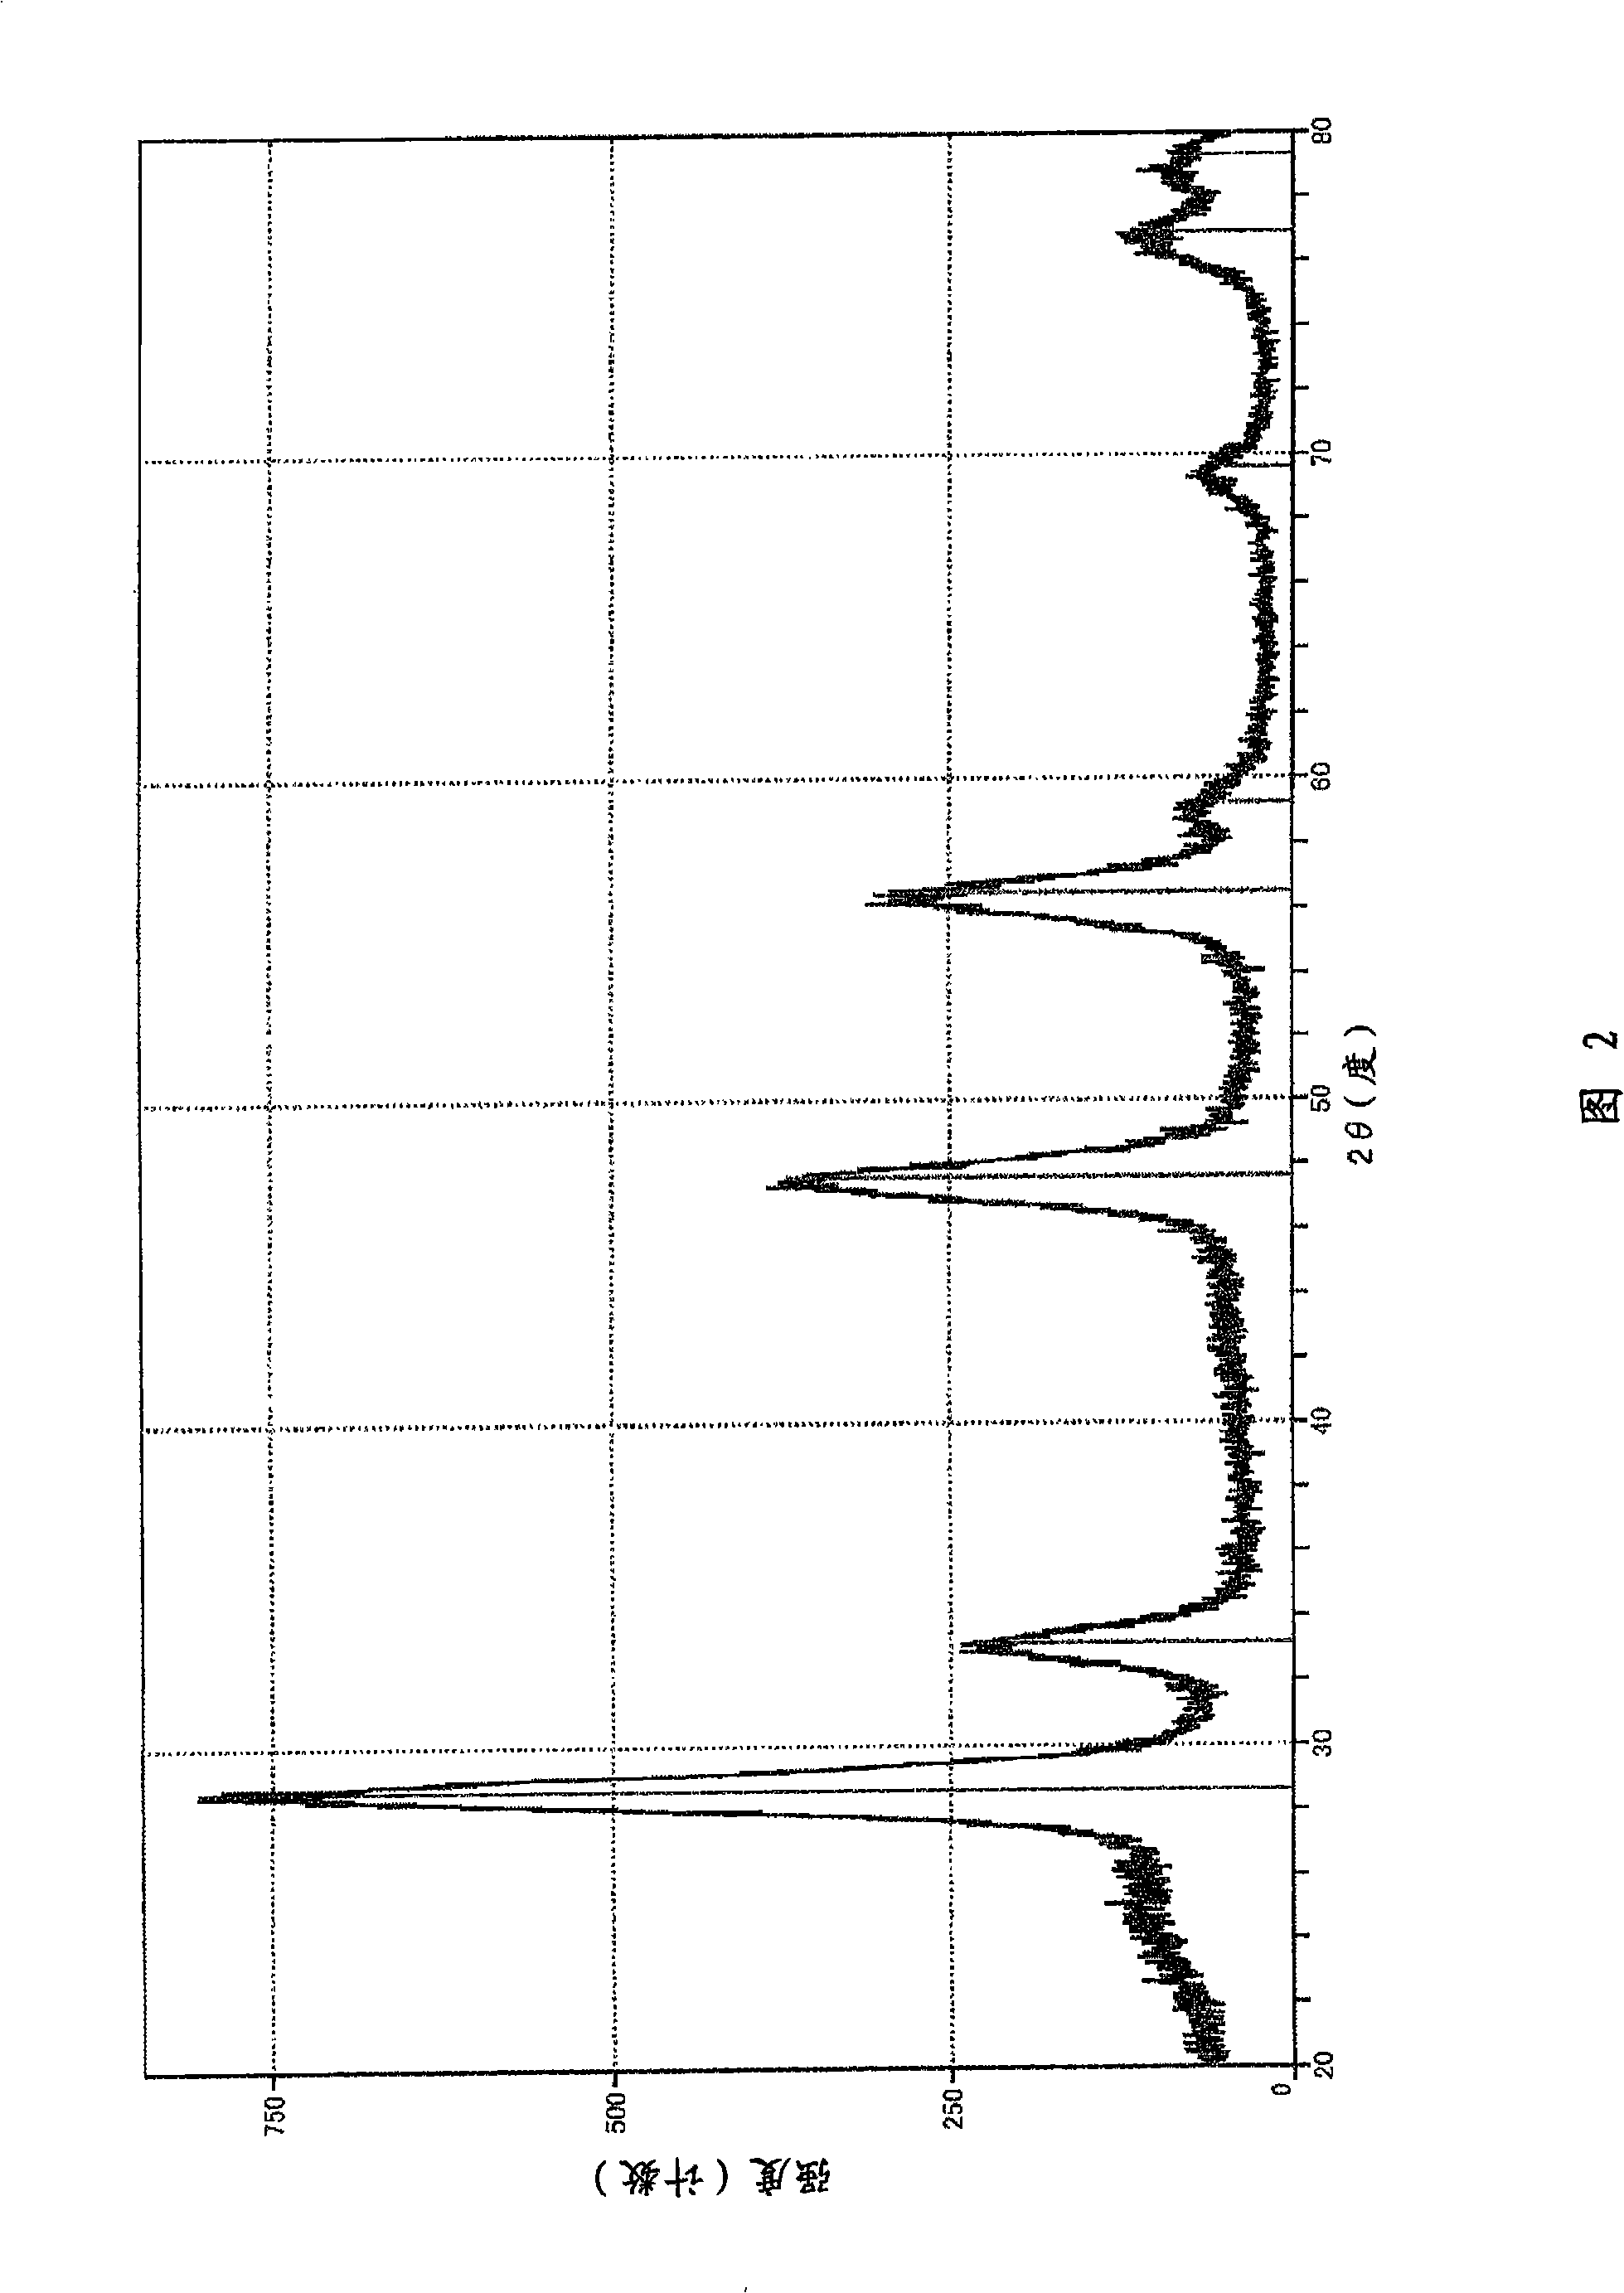 Microparticle-supported carbon particle, method for production thereof, and fuel cell electrode